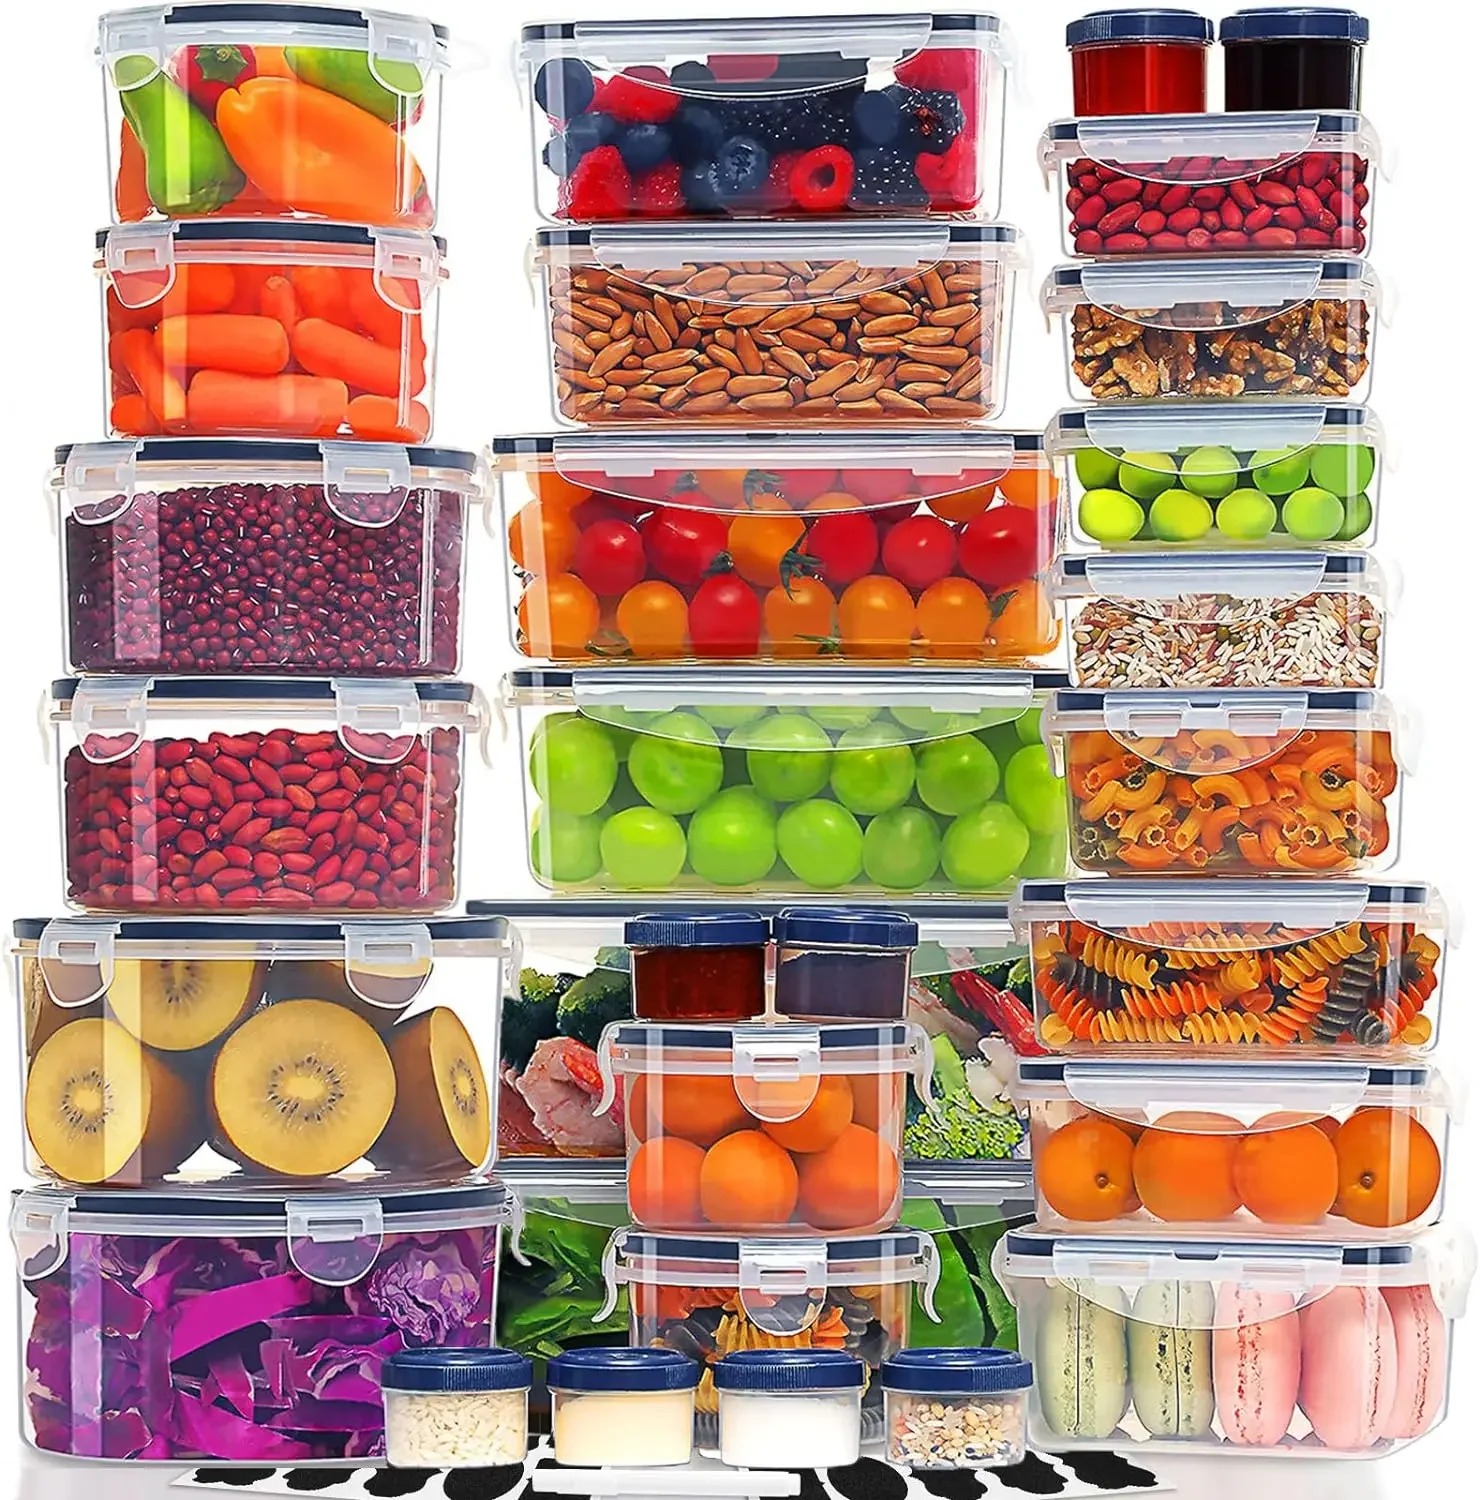 

Large Food Storage Containers Set - Leakproof, BPA-Free Plastic with Lids Airtight for Kitchen Storage and Organization